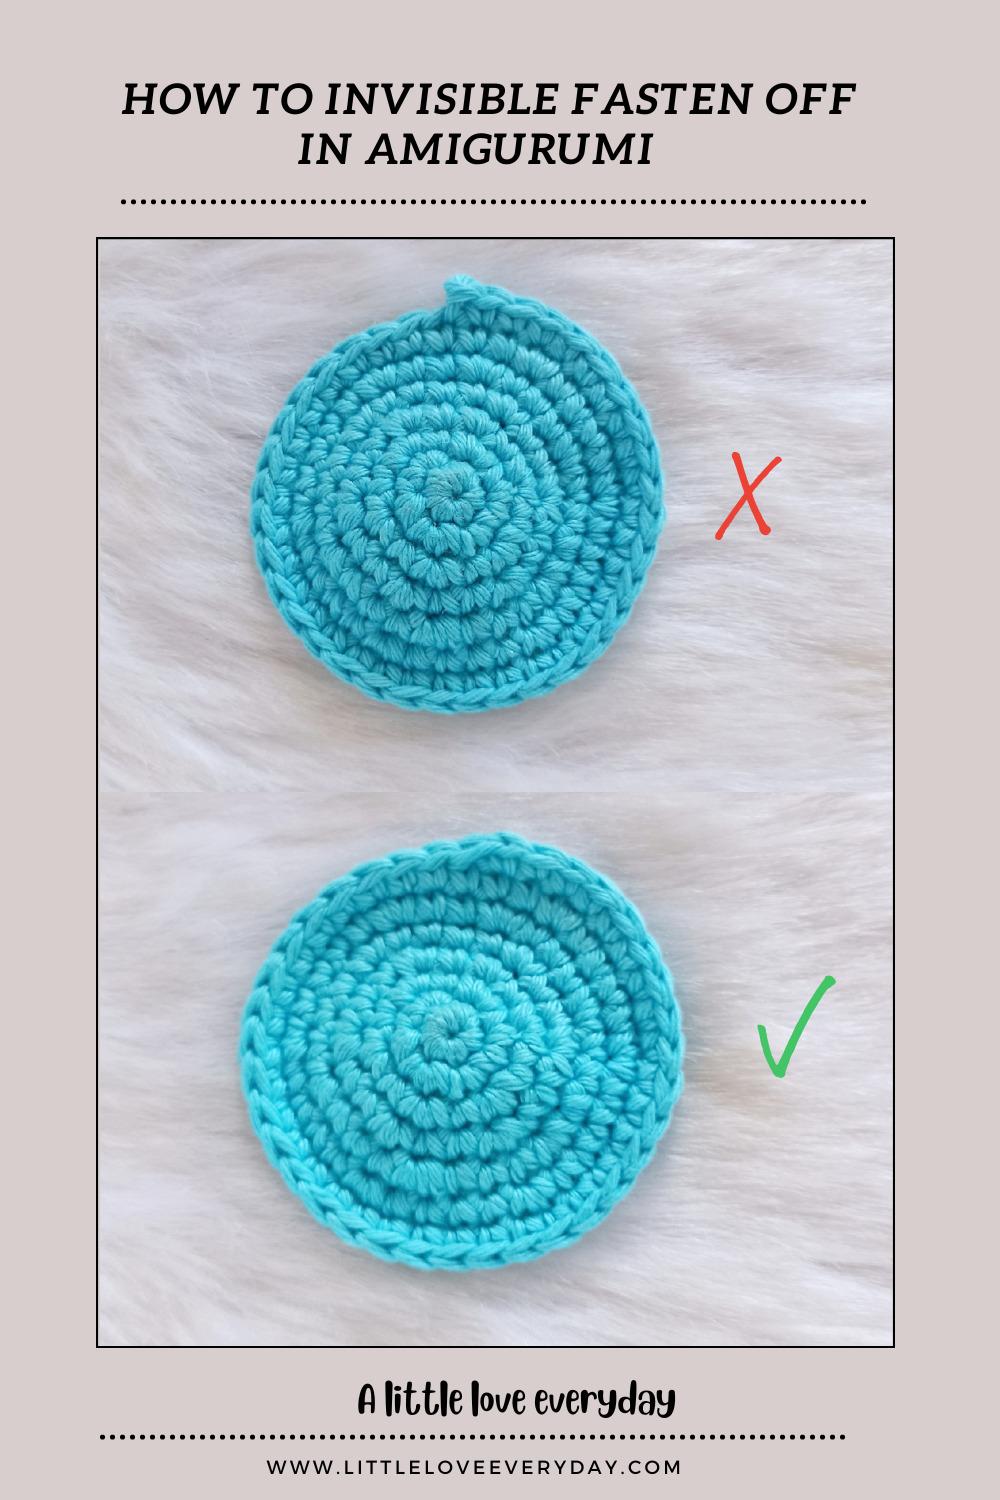 How To: Invisible Fasten Off in Crochet (photo tutorial)